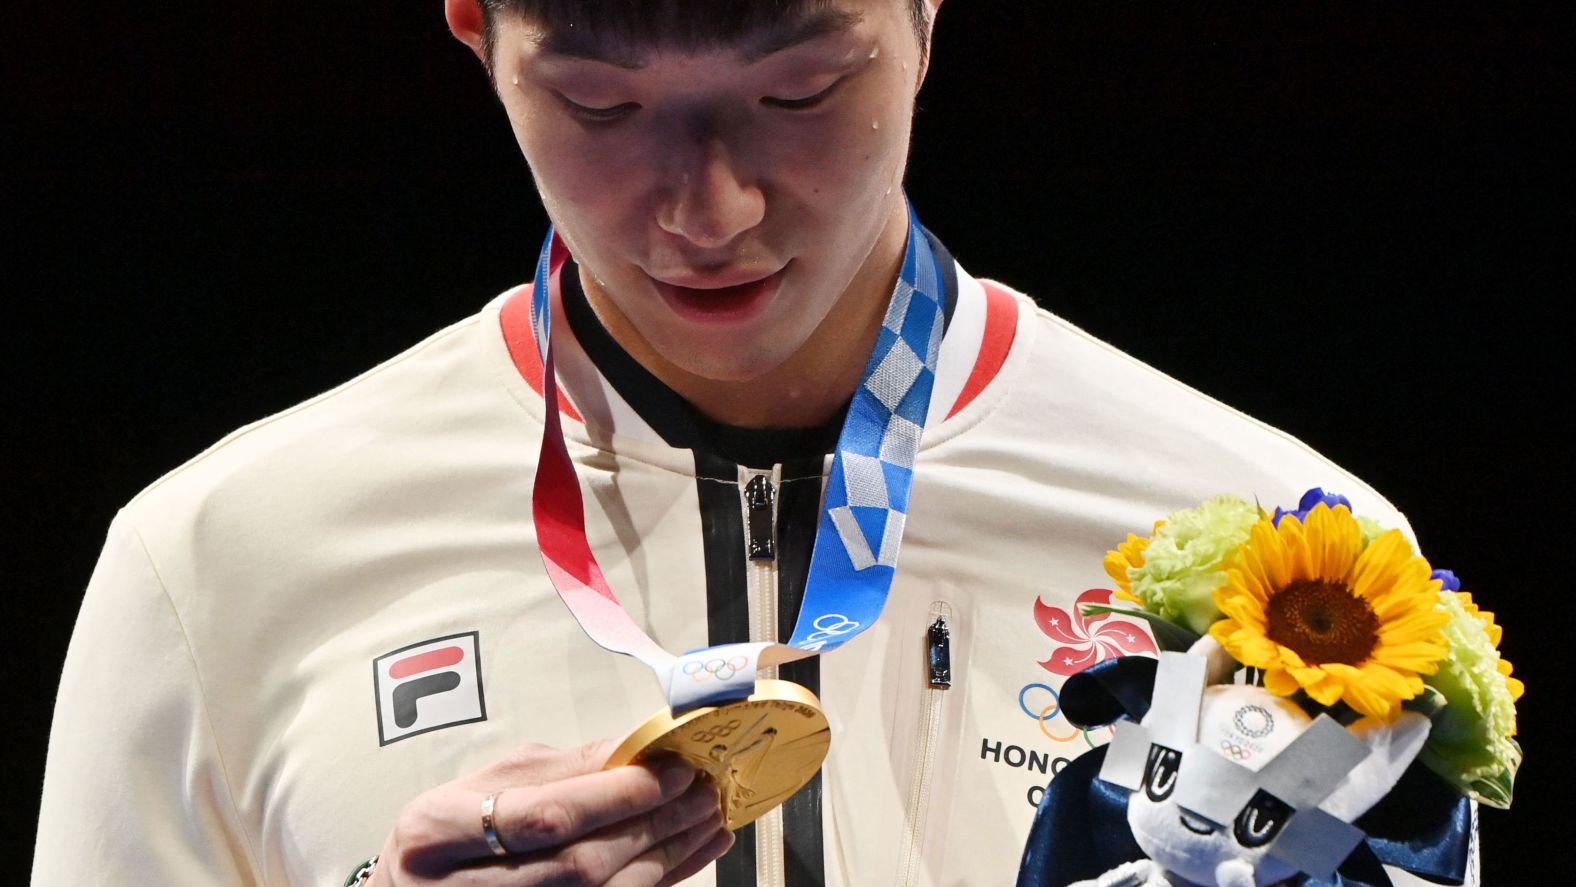 Hong Kong fencer Edgar Cheung looks at his gold medal after beating Italy's Daniele Garozzo in the men's foil final on July 26. It was <a href="index.php?page=&url=https%3A%2F%2Fwww.cnn.com%2Fworld%2Flive-news%2Ftokyo-2020-olympics-07-26-21-spt%2Fh_49e87856e0c333e6f009a513d4e01e57" target="_blank">Hong Kong's first gold</a> at the Summer Olympics in 25 years.